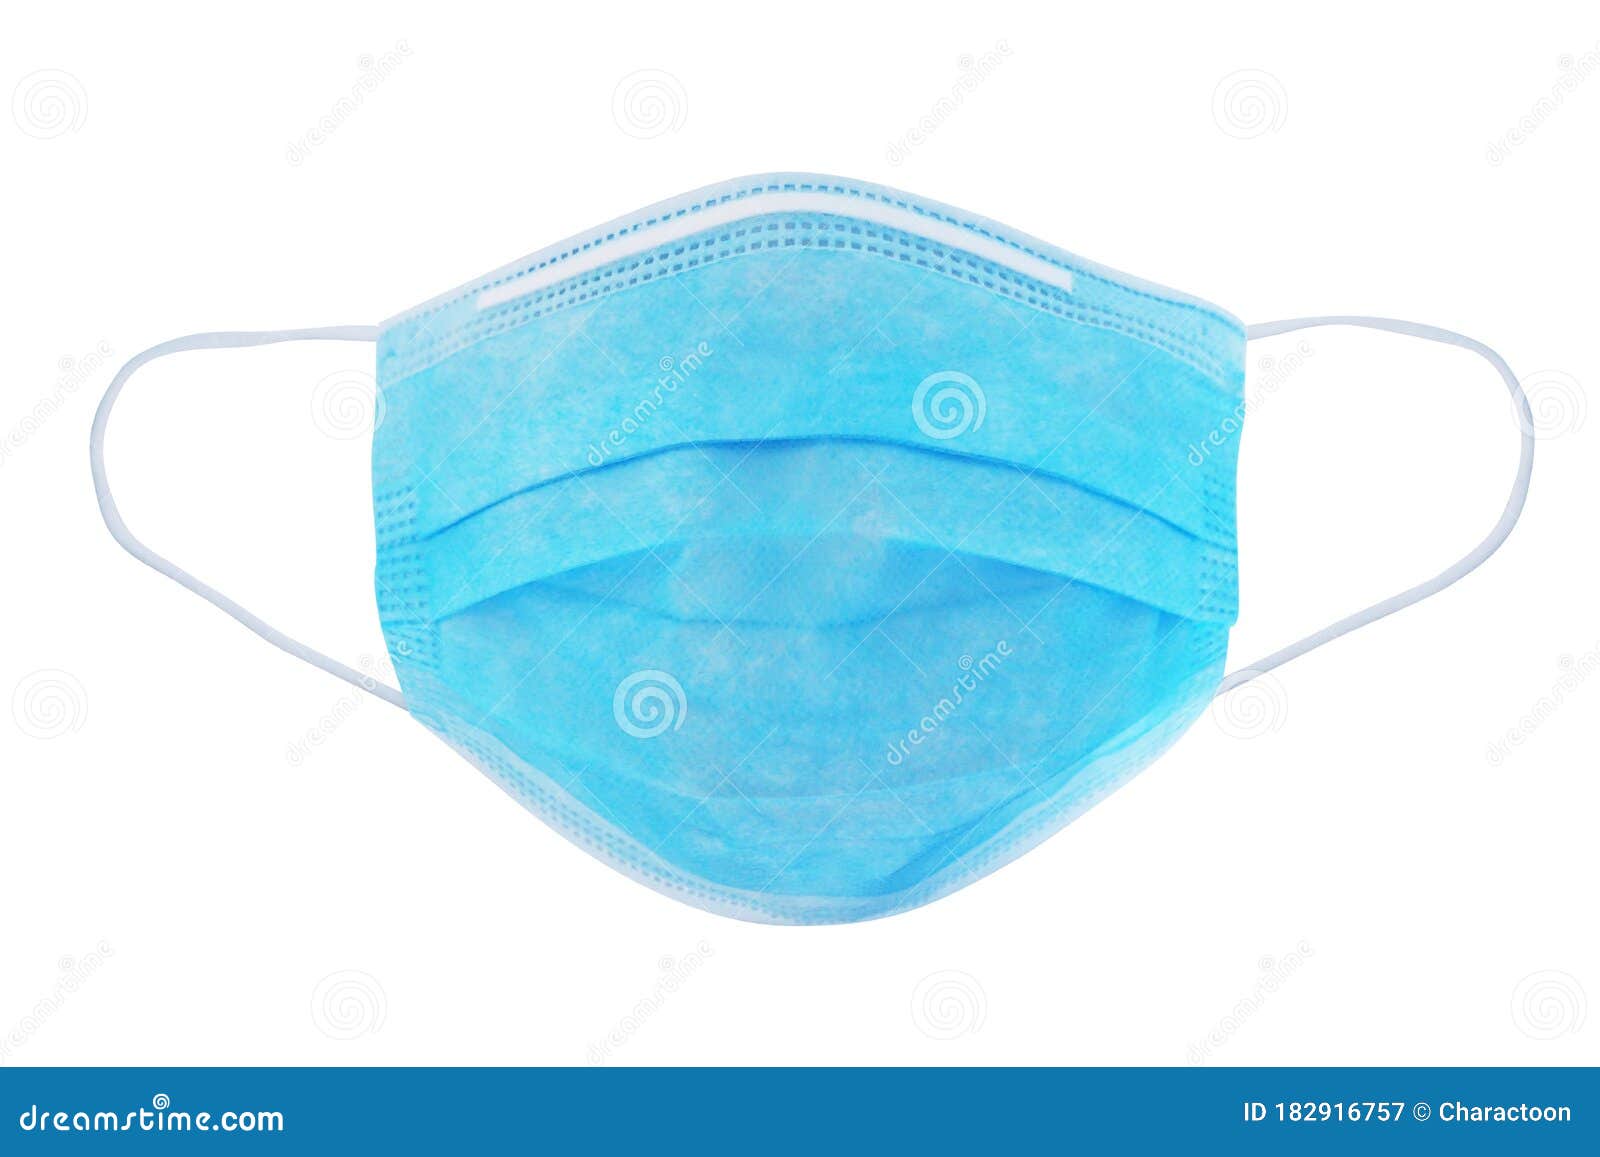 medical use surgical face mask for protect against virus and bacteria. 3 layer protective surgical mask 